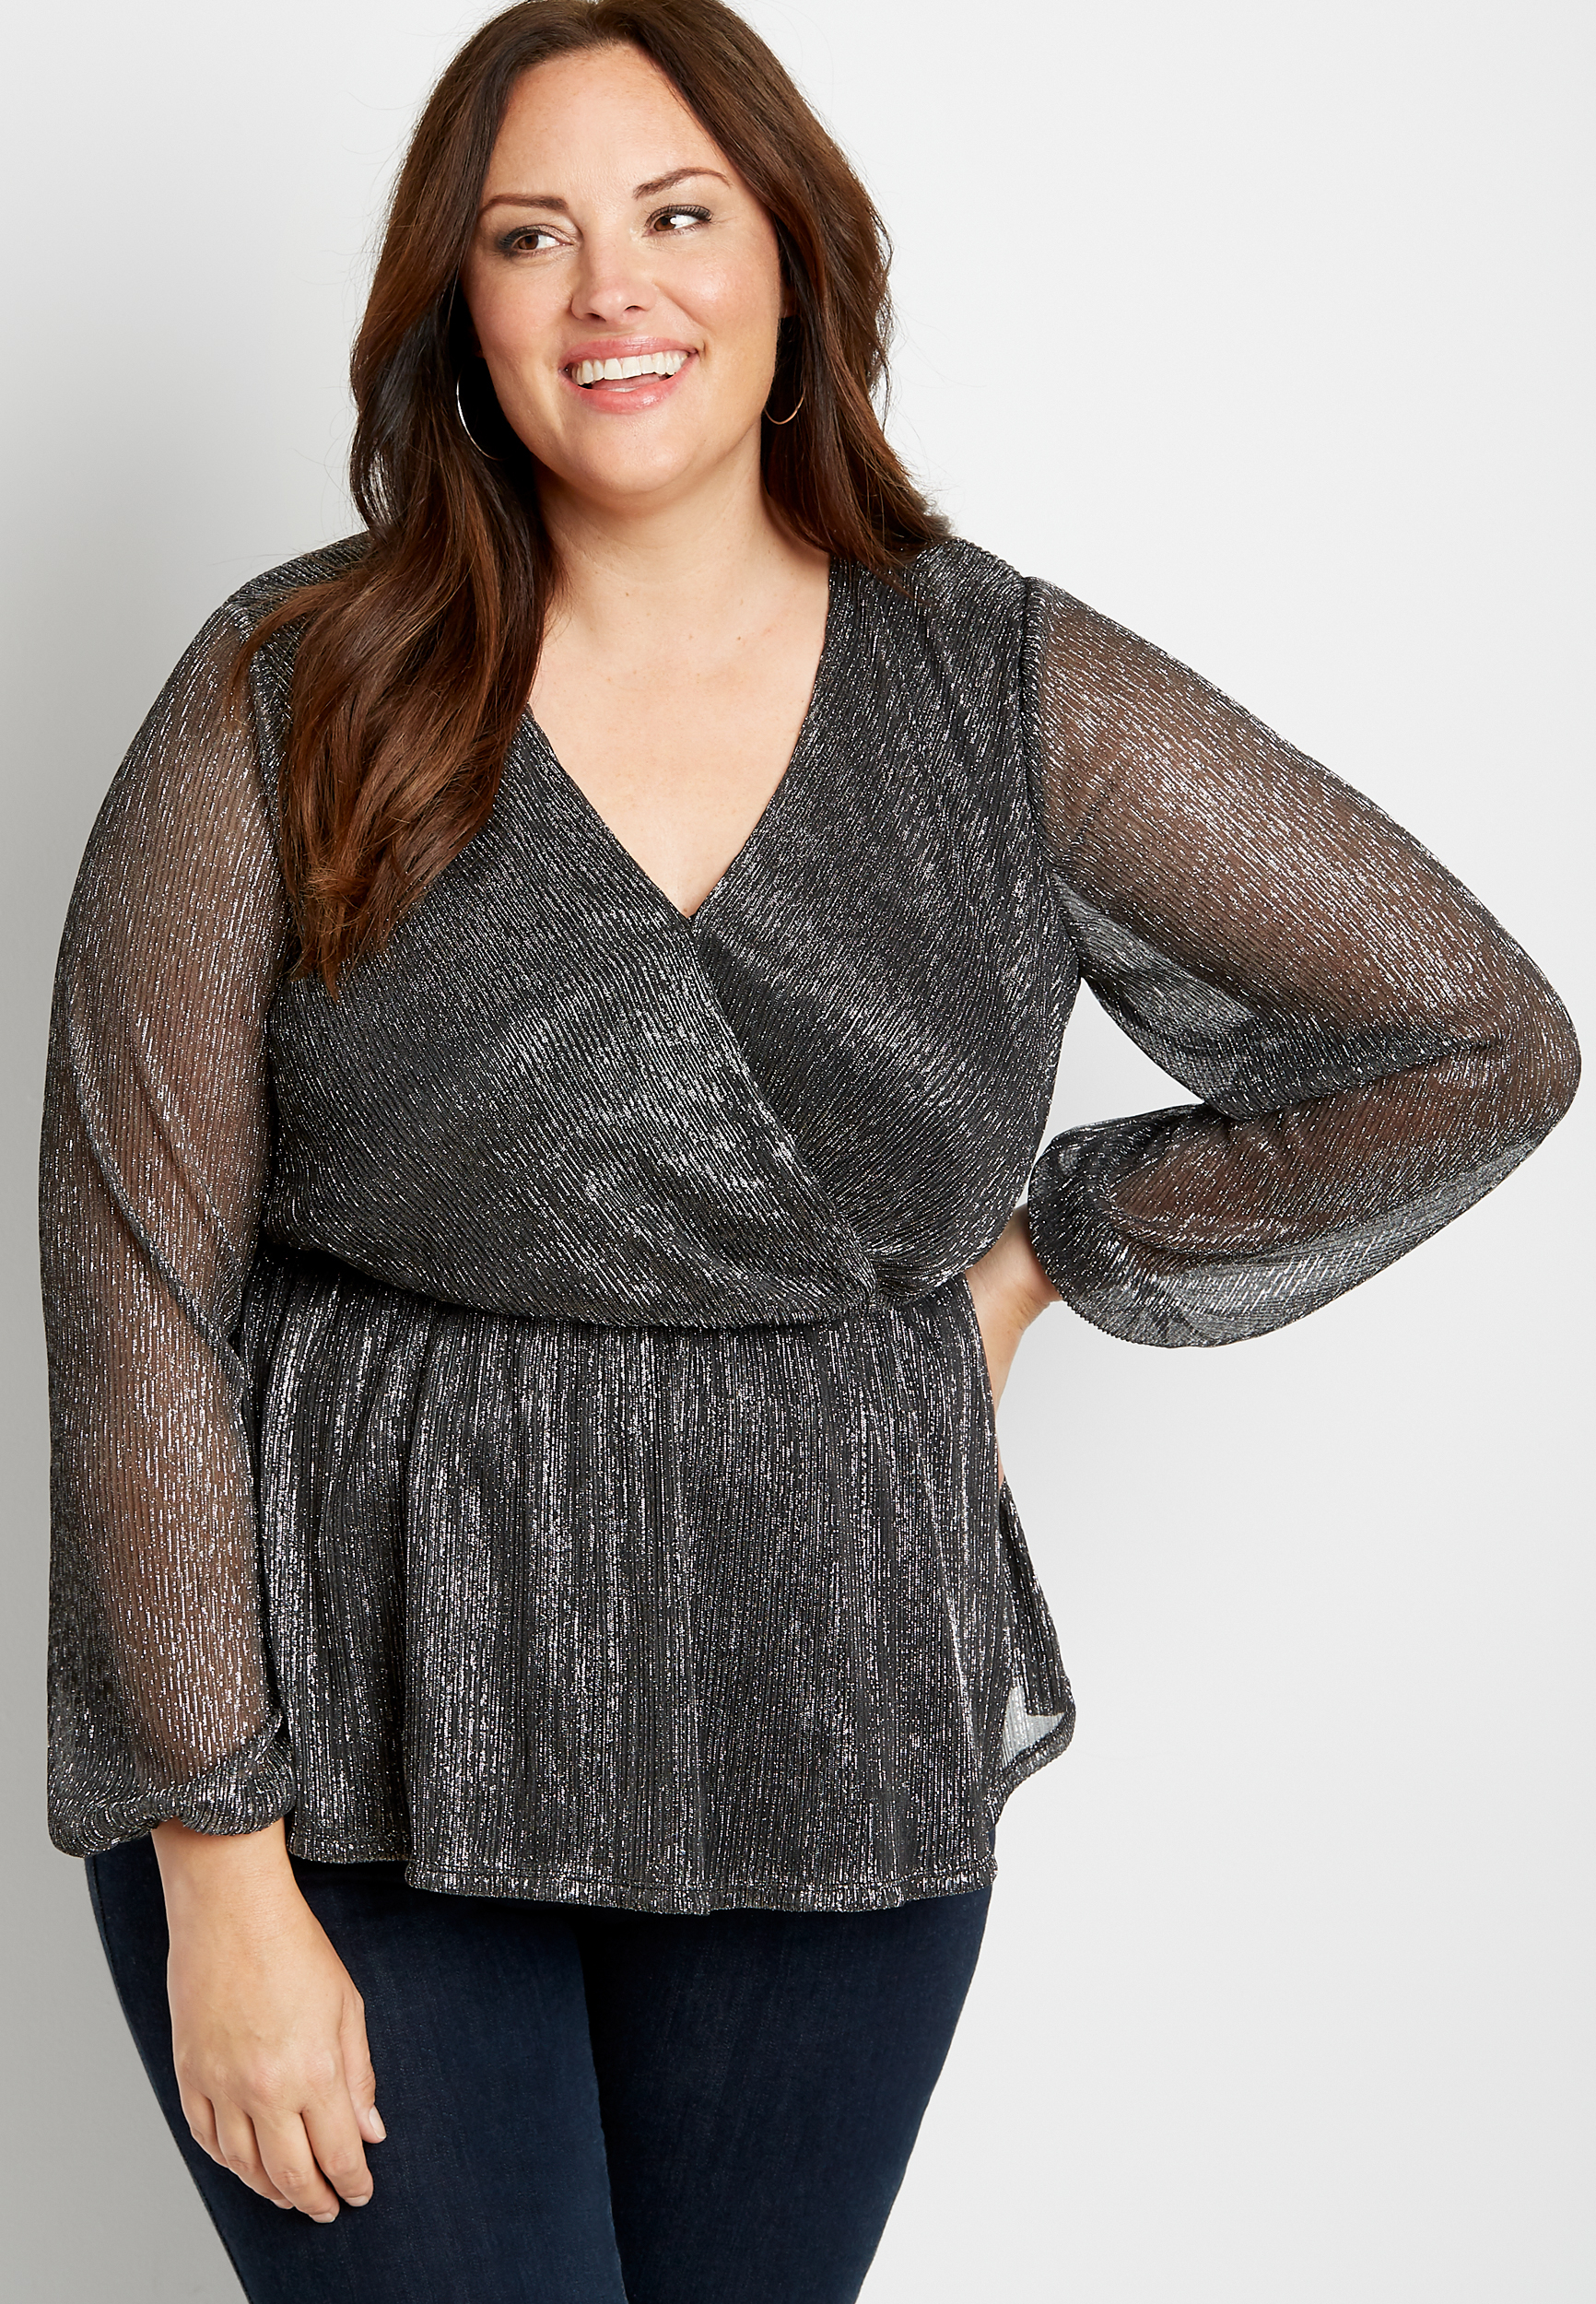 Plus Size Shimmer Wrap Peplum Blouse | maurices